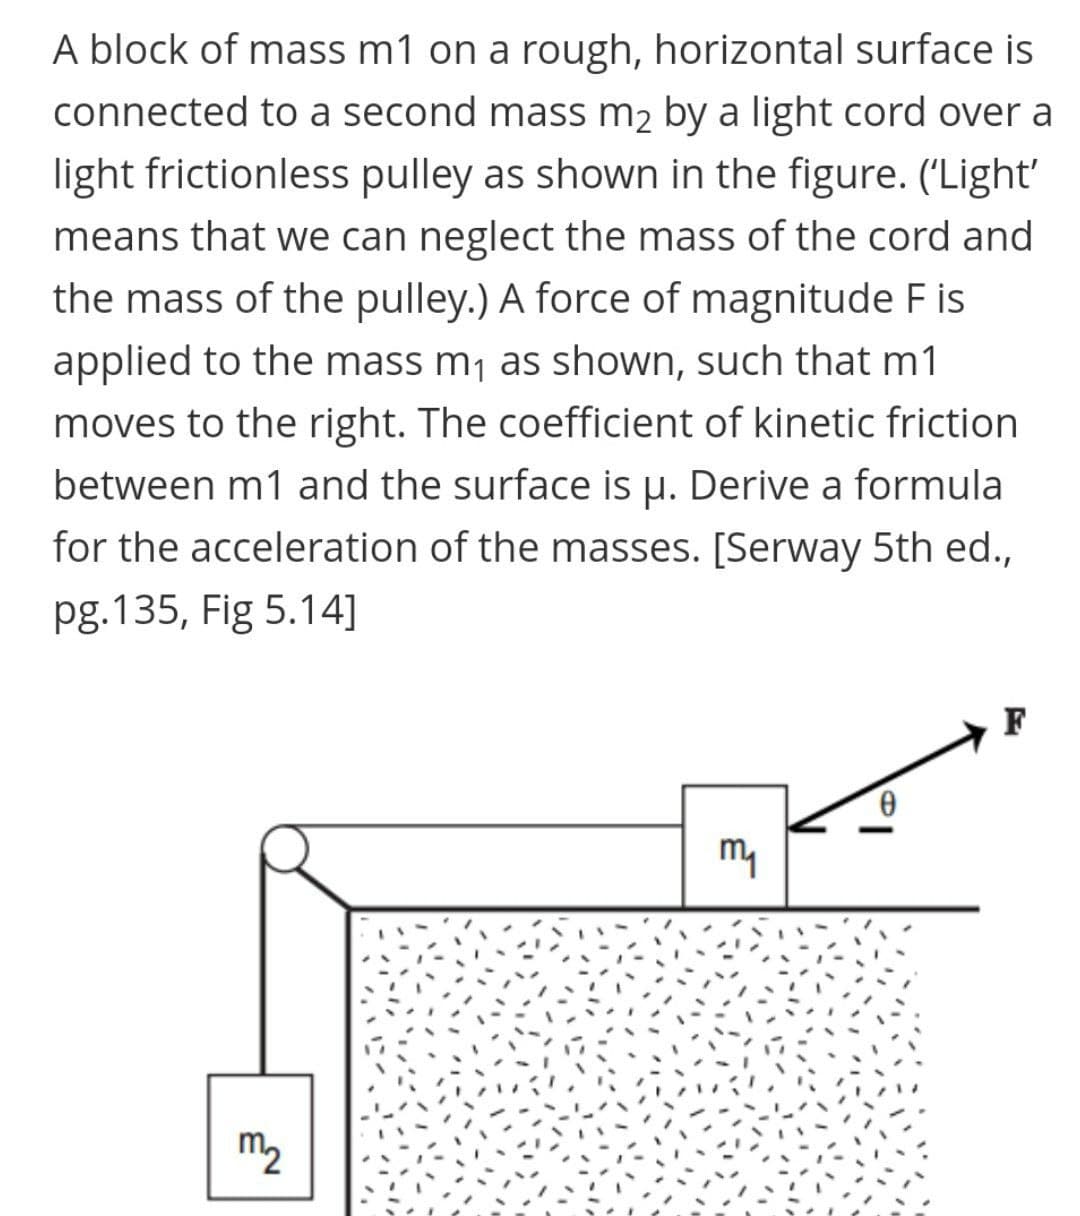 A block of mass m1 on a rough, horizontal surface is
connected to a second mass m2 by a light cord over a
light frictionless pulley as shown in the figure. ('Light'
means that we can neglect the mass of the cord and
the mass of the pulley.) A force of magnitude F is
applied to the mass m1 as shown, such that m1
moves to the right. The coefficient of kinetic friction
between m1 and the surface is u. Derive a formula
for the acceleration of the masses. [Serway 5th ed.,
pg.135, Fig 5.14]
F
my
m2
